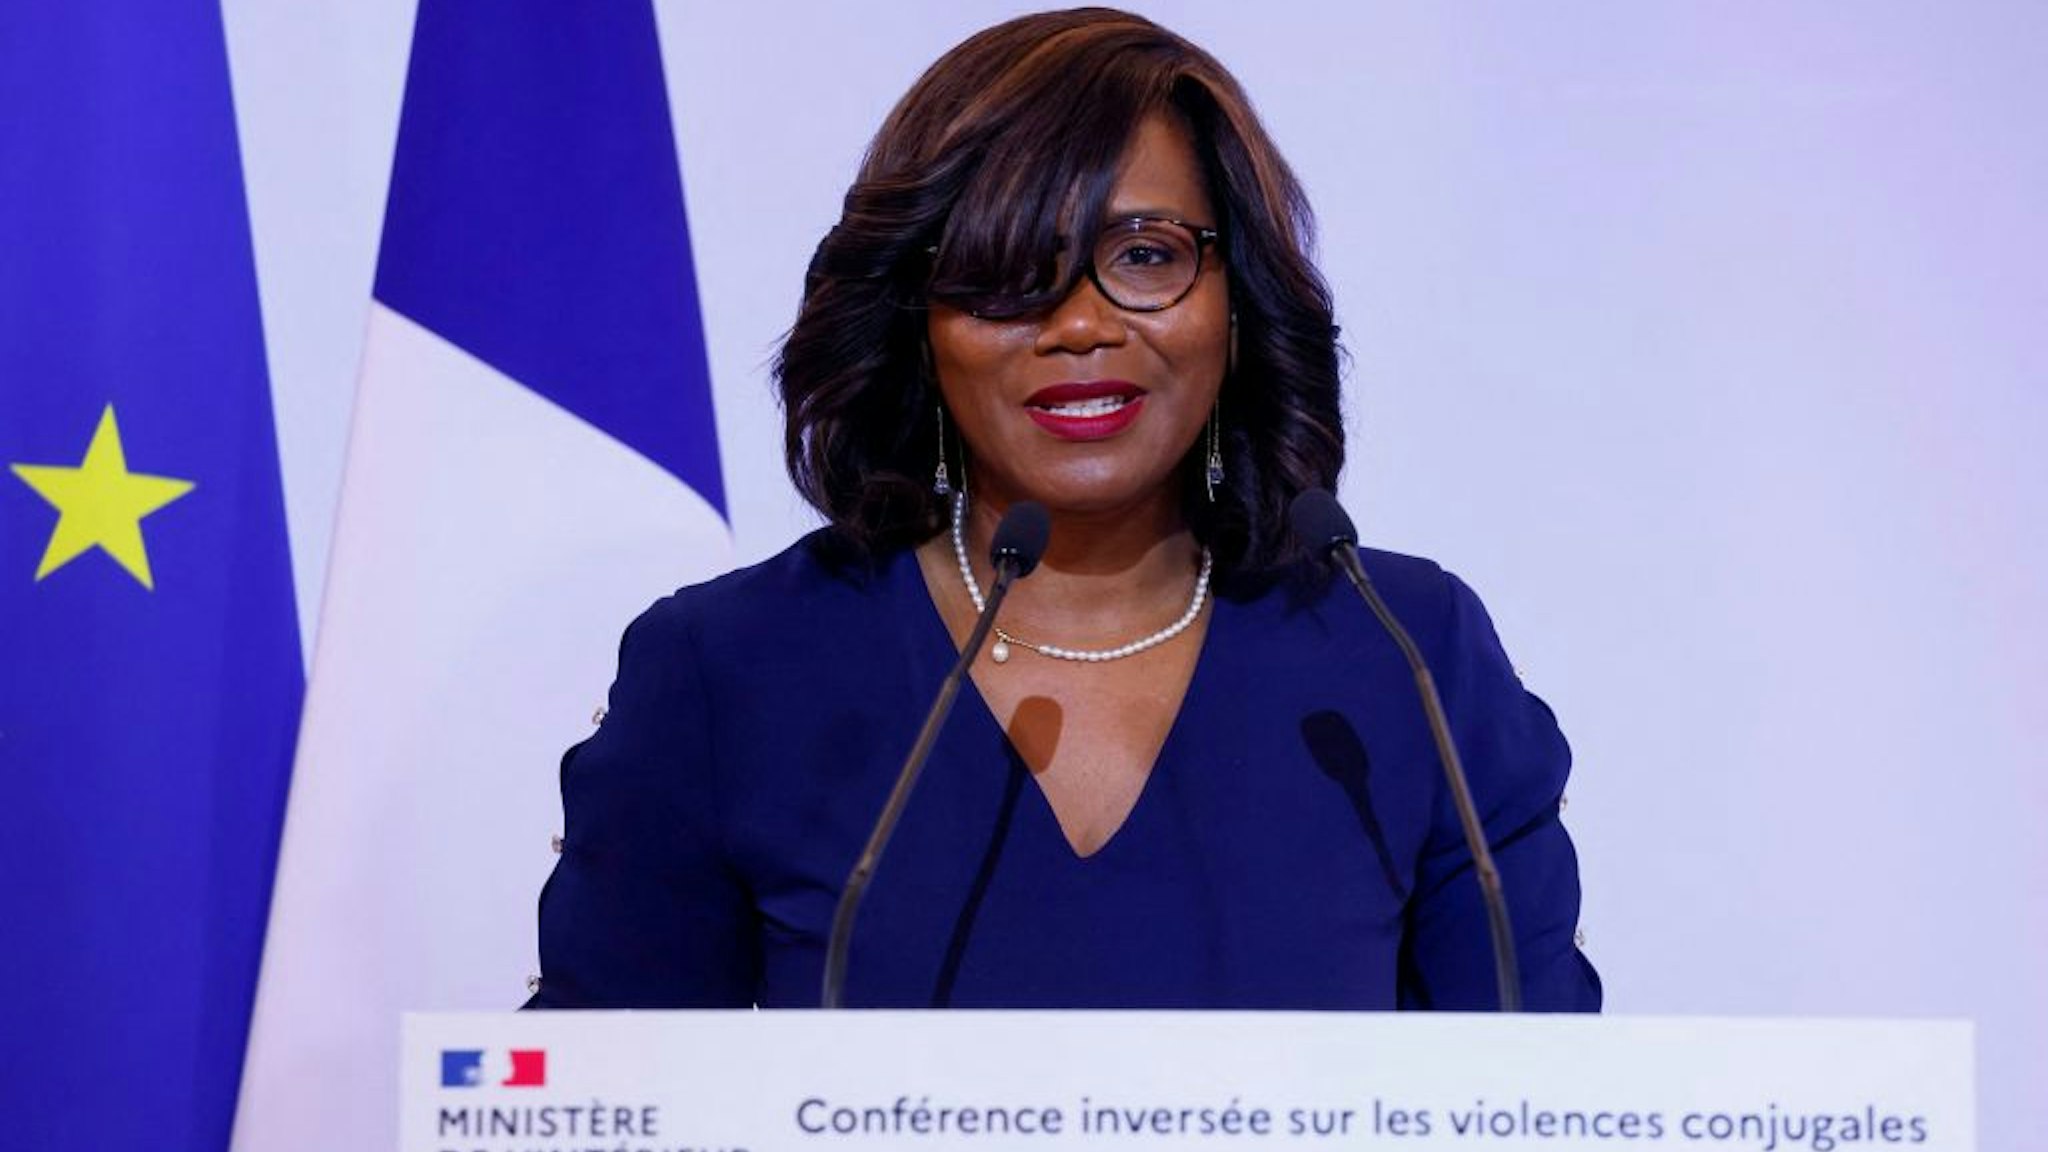 French Junior Minister of Gender Equality Elisabeth Moreno delivers a speech during a "reversed conference" with victims of domestic violence (violences conjugales) and relatives testifying, at the Interior Ministry at Place Beauvau in Paris, on September 6, 2021.